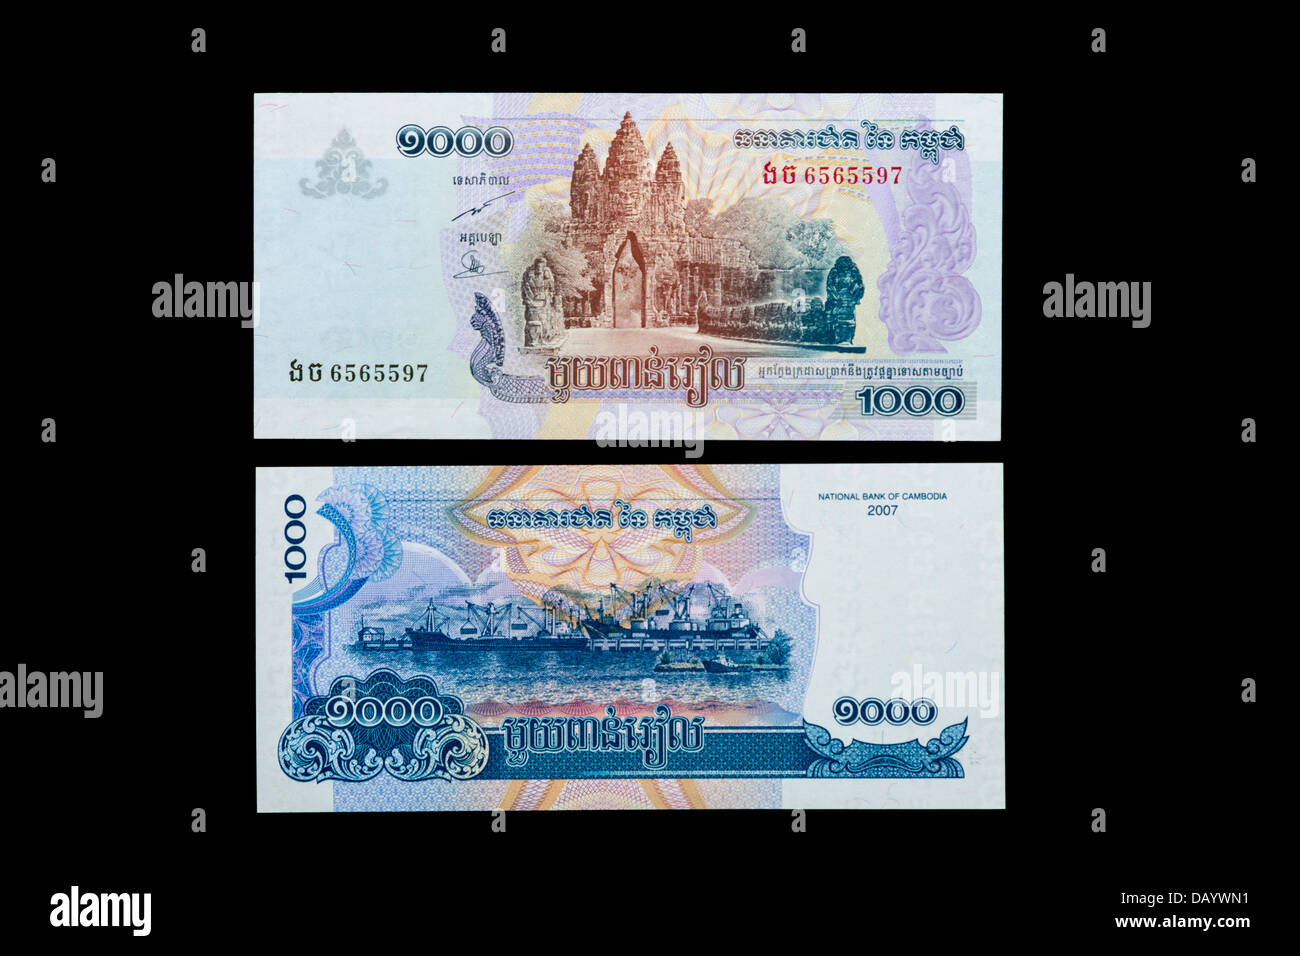 Cambodian Banknote, Front and Back, One Thousand Riel. Stock Photo